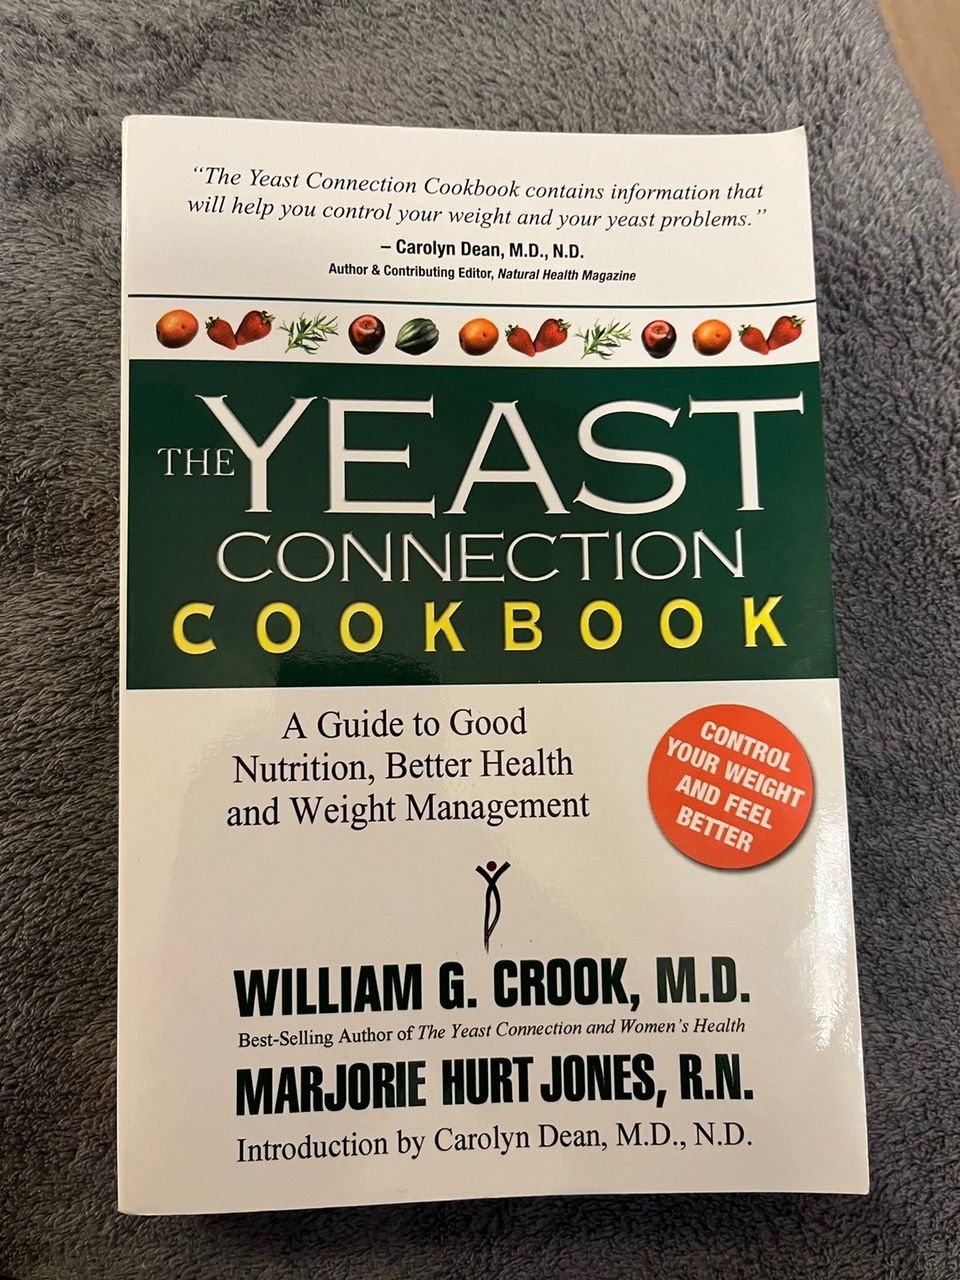 The yeast connection cookbook